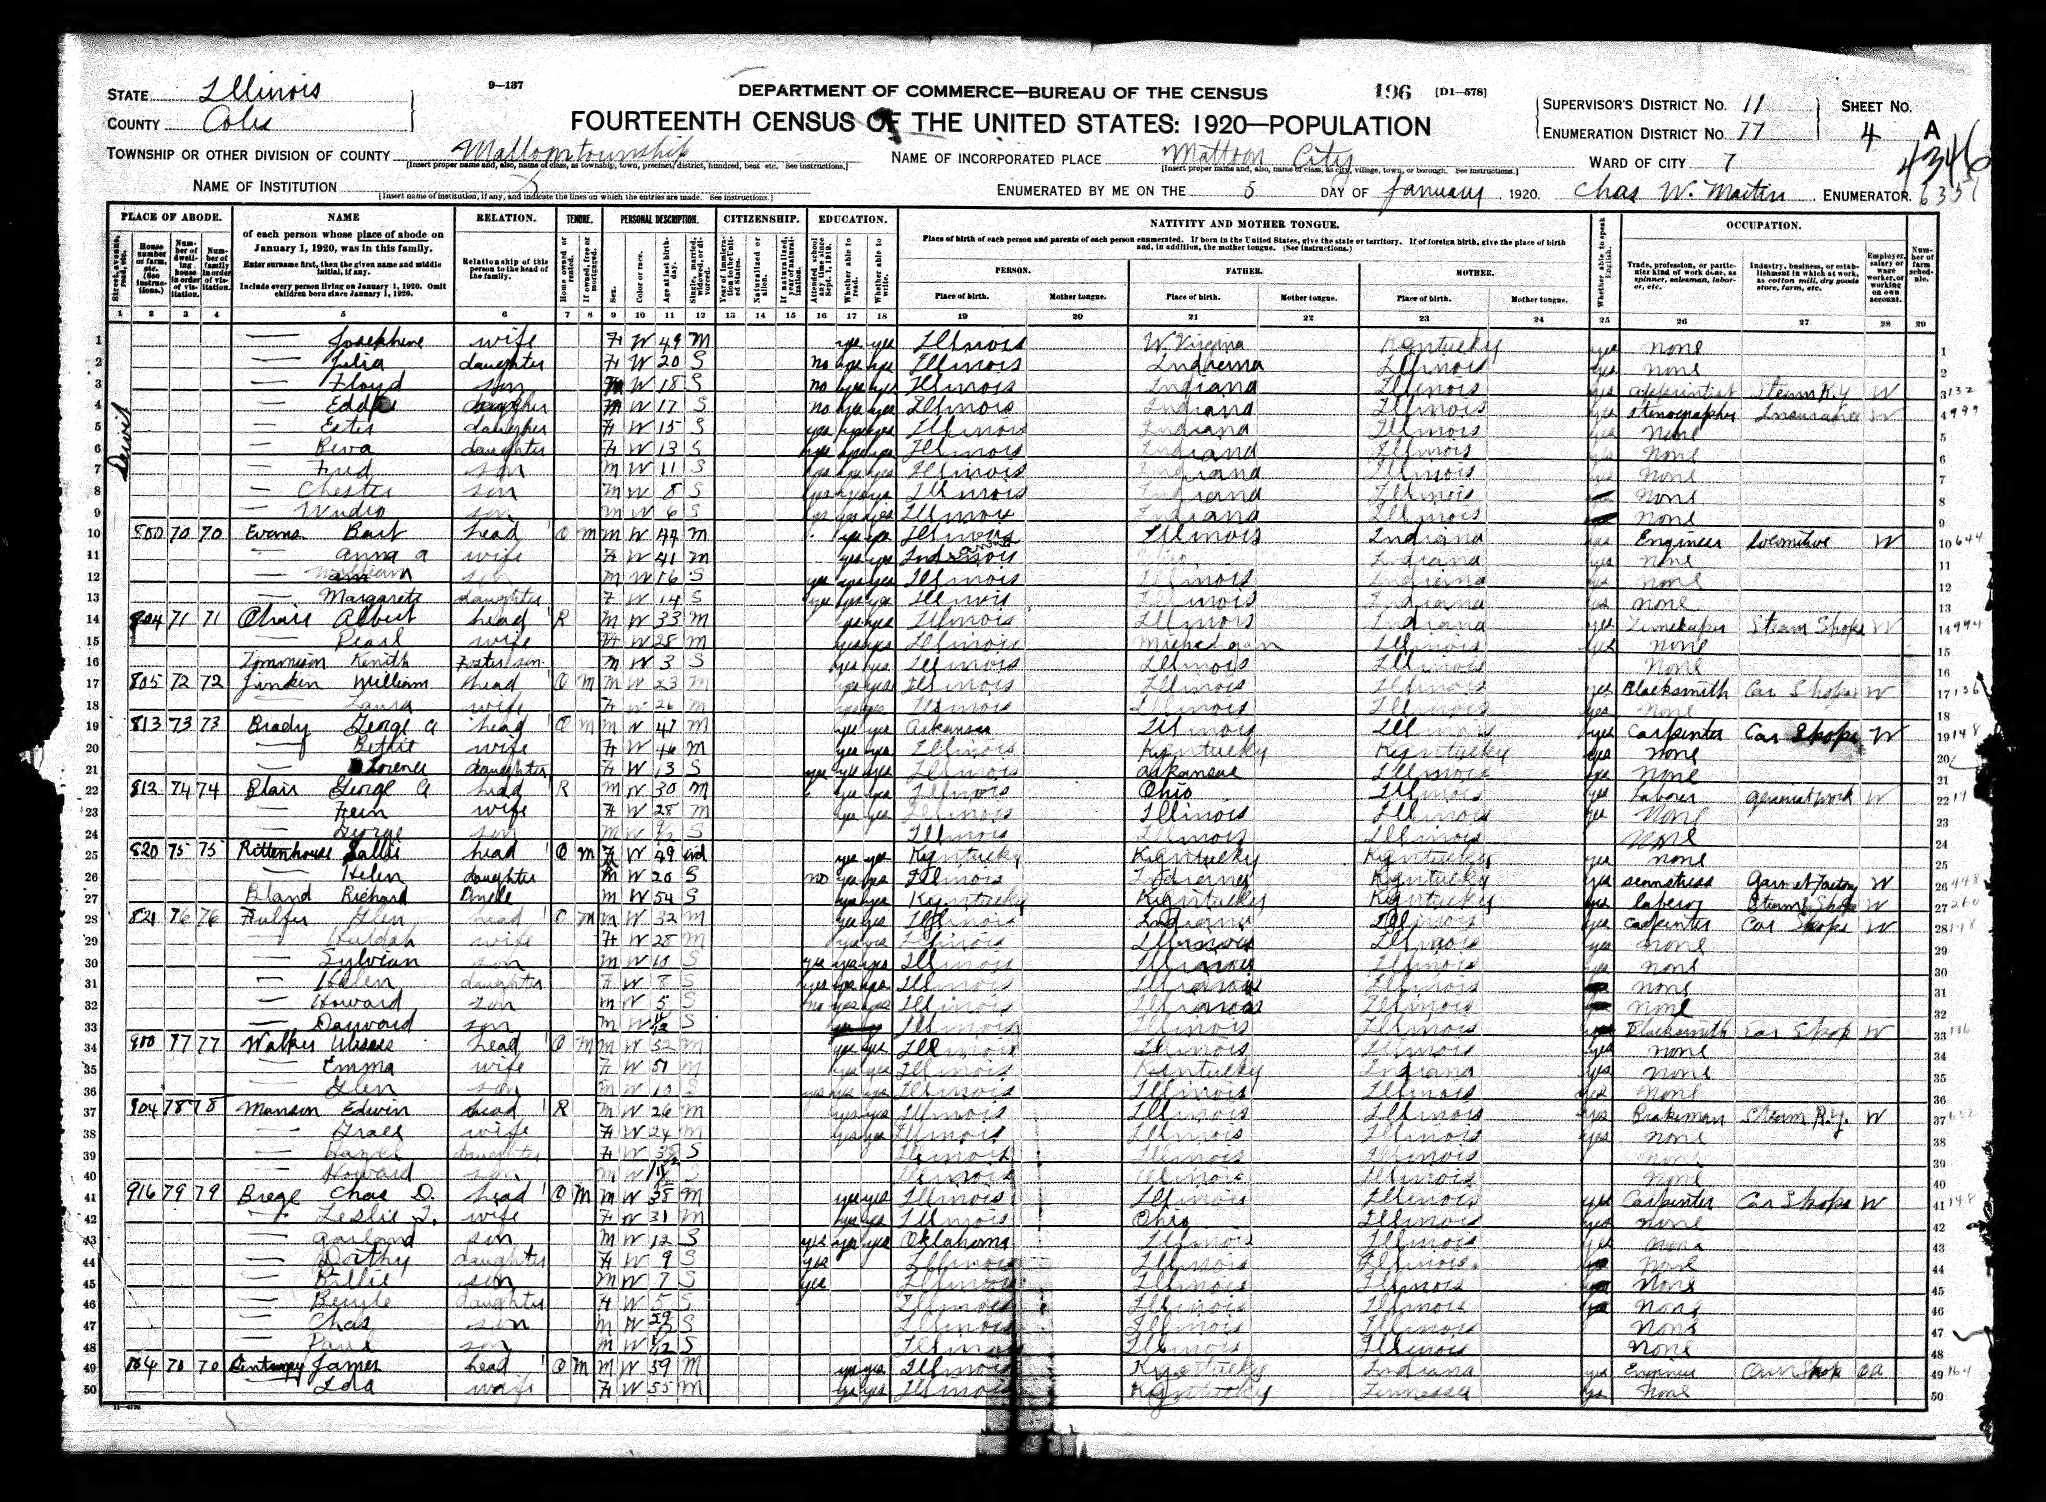 Ulysses S. and Emma (Senteney) Walker, 1920 Coles County, Illinois, census